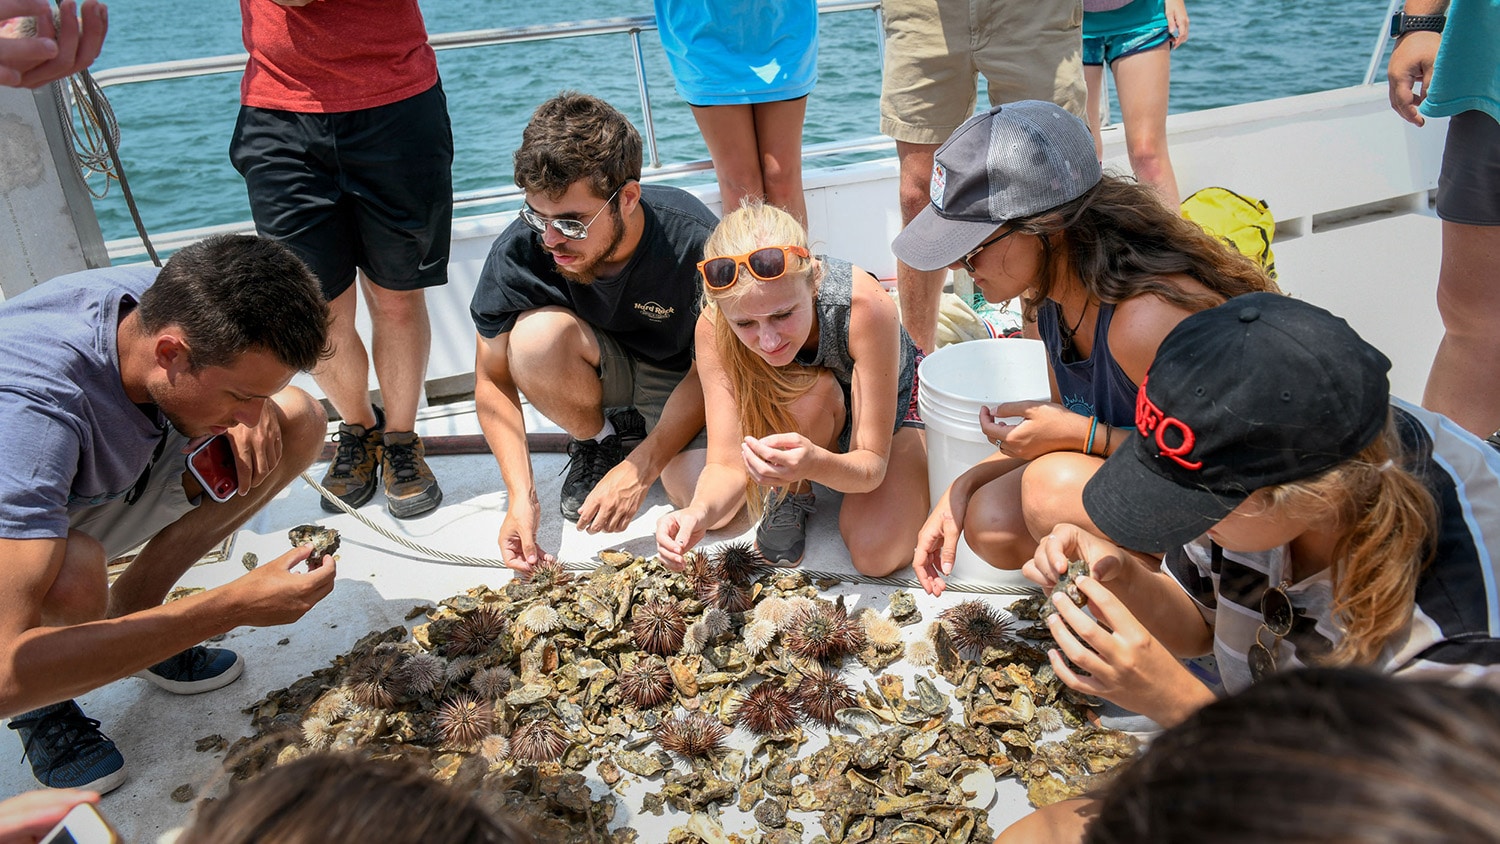 Students examine marine animals on the deck of a boat.